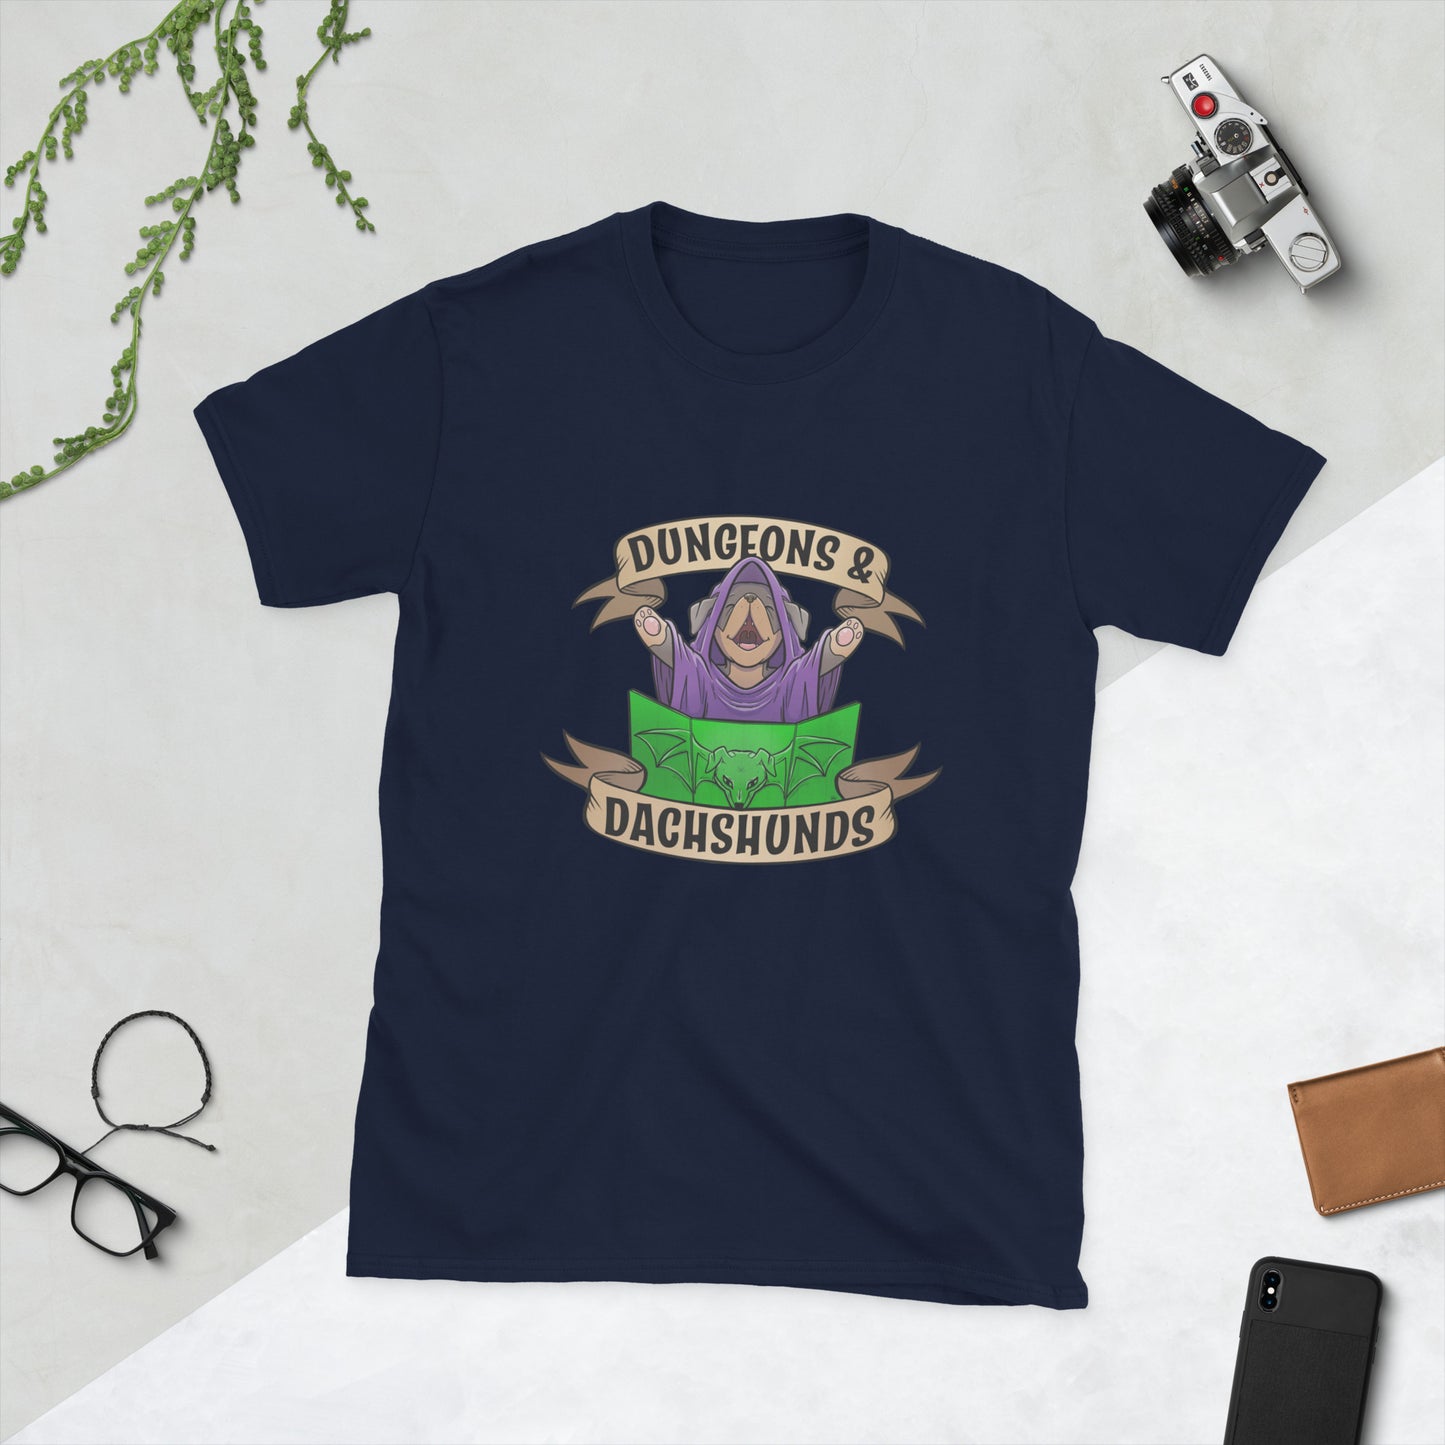 Dungeons and Dachshunds Short-Sleeve Unisex T-Shirt  Level 1 Gamers Navy S 